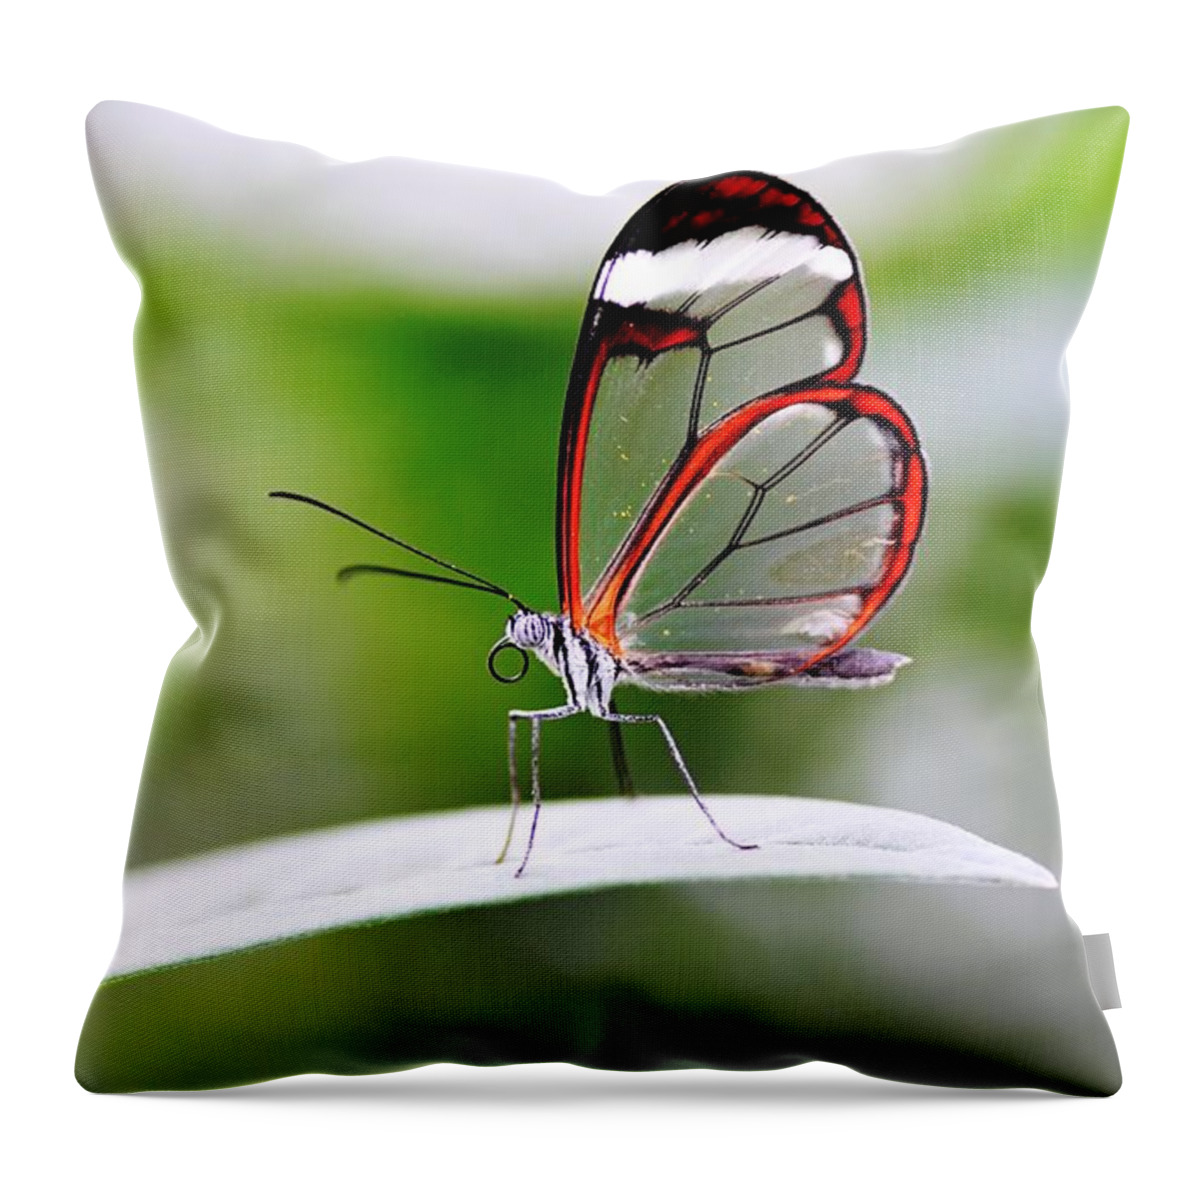 Animal Themes Throw Pillow featuring the photograph The Glasswinged Butterfly by Pallab Seth